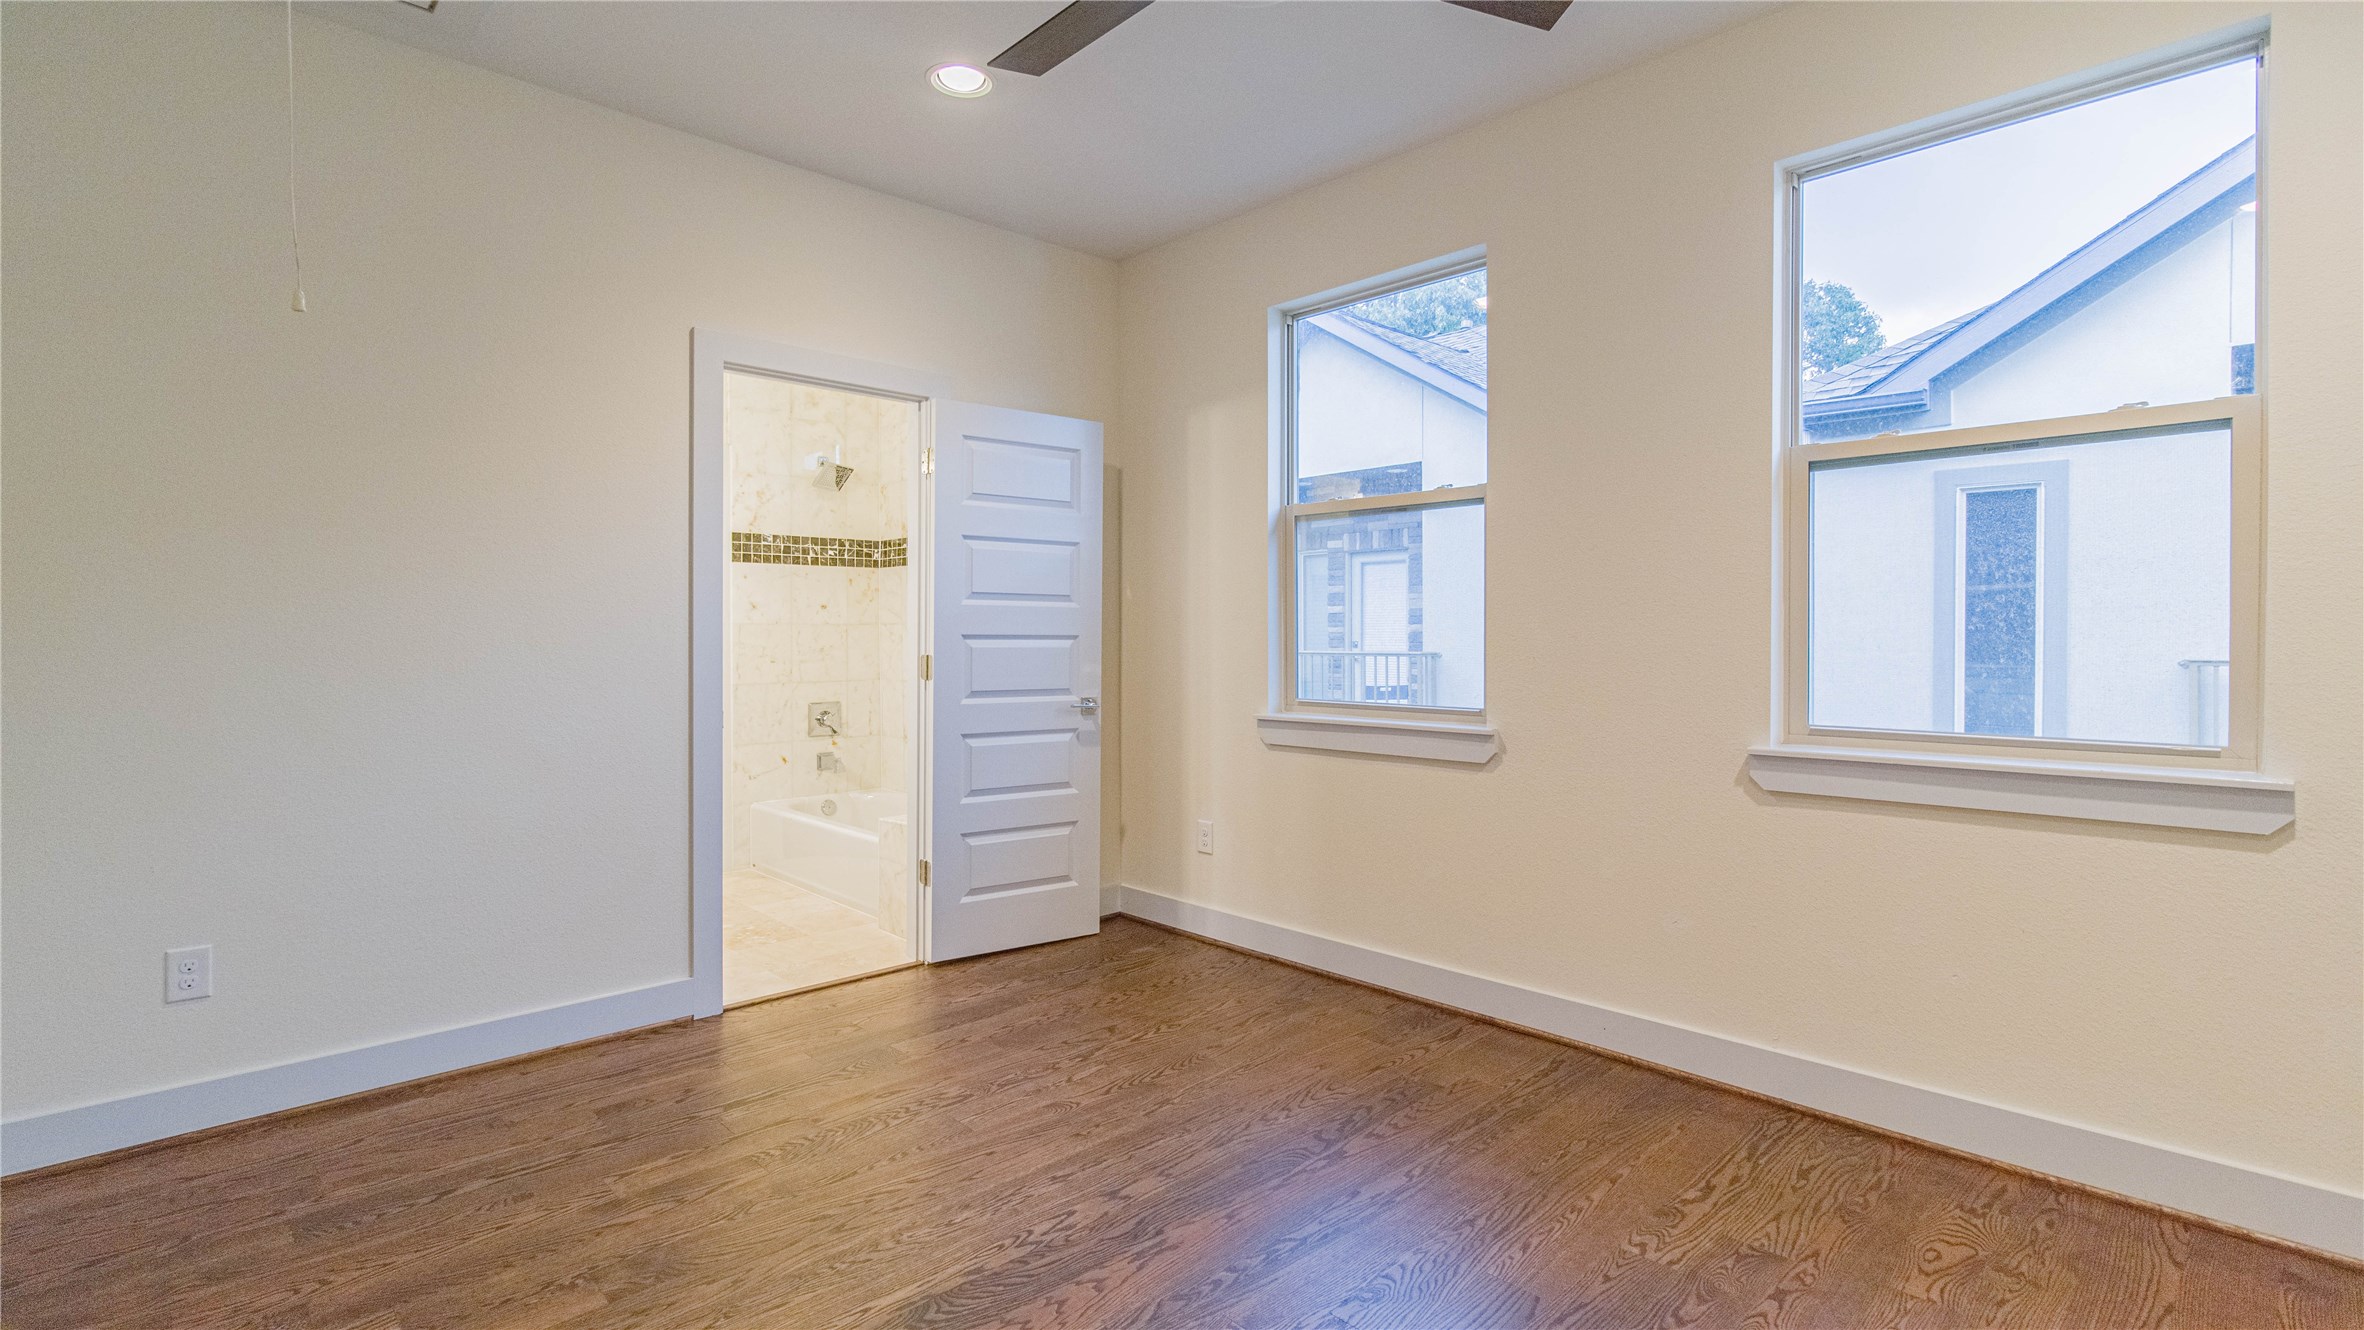 Third Floor Second Bedroom! - If you have additional questions regarding 4833 Chenevert Street  in Houston or would like to tour the property with us call 800-660-1022 and reference MLS# 96976639.